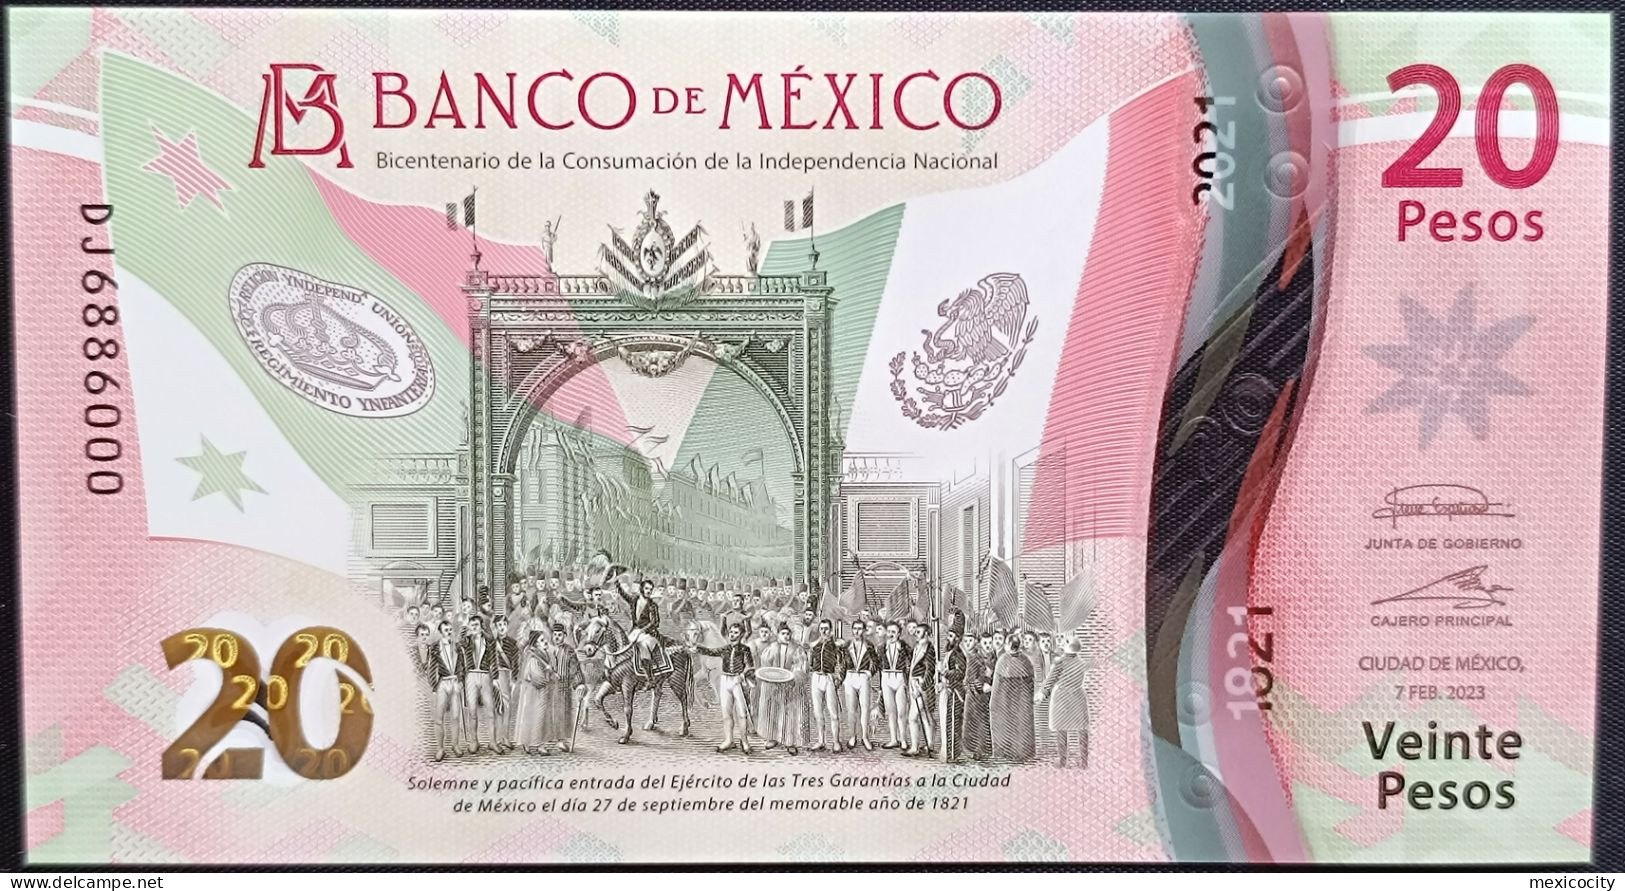 MEXICO $20 SERIES DJ6886000 ANGEL # - 7-FEBR-2023 INDEPENDENCE POLYMER NOTE BU Mint Crisp - Mexico